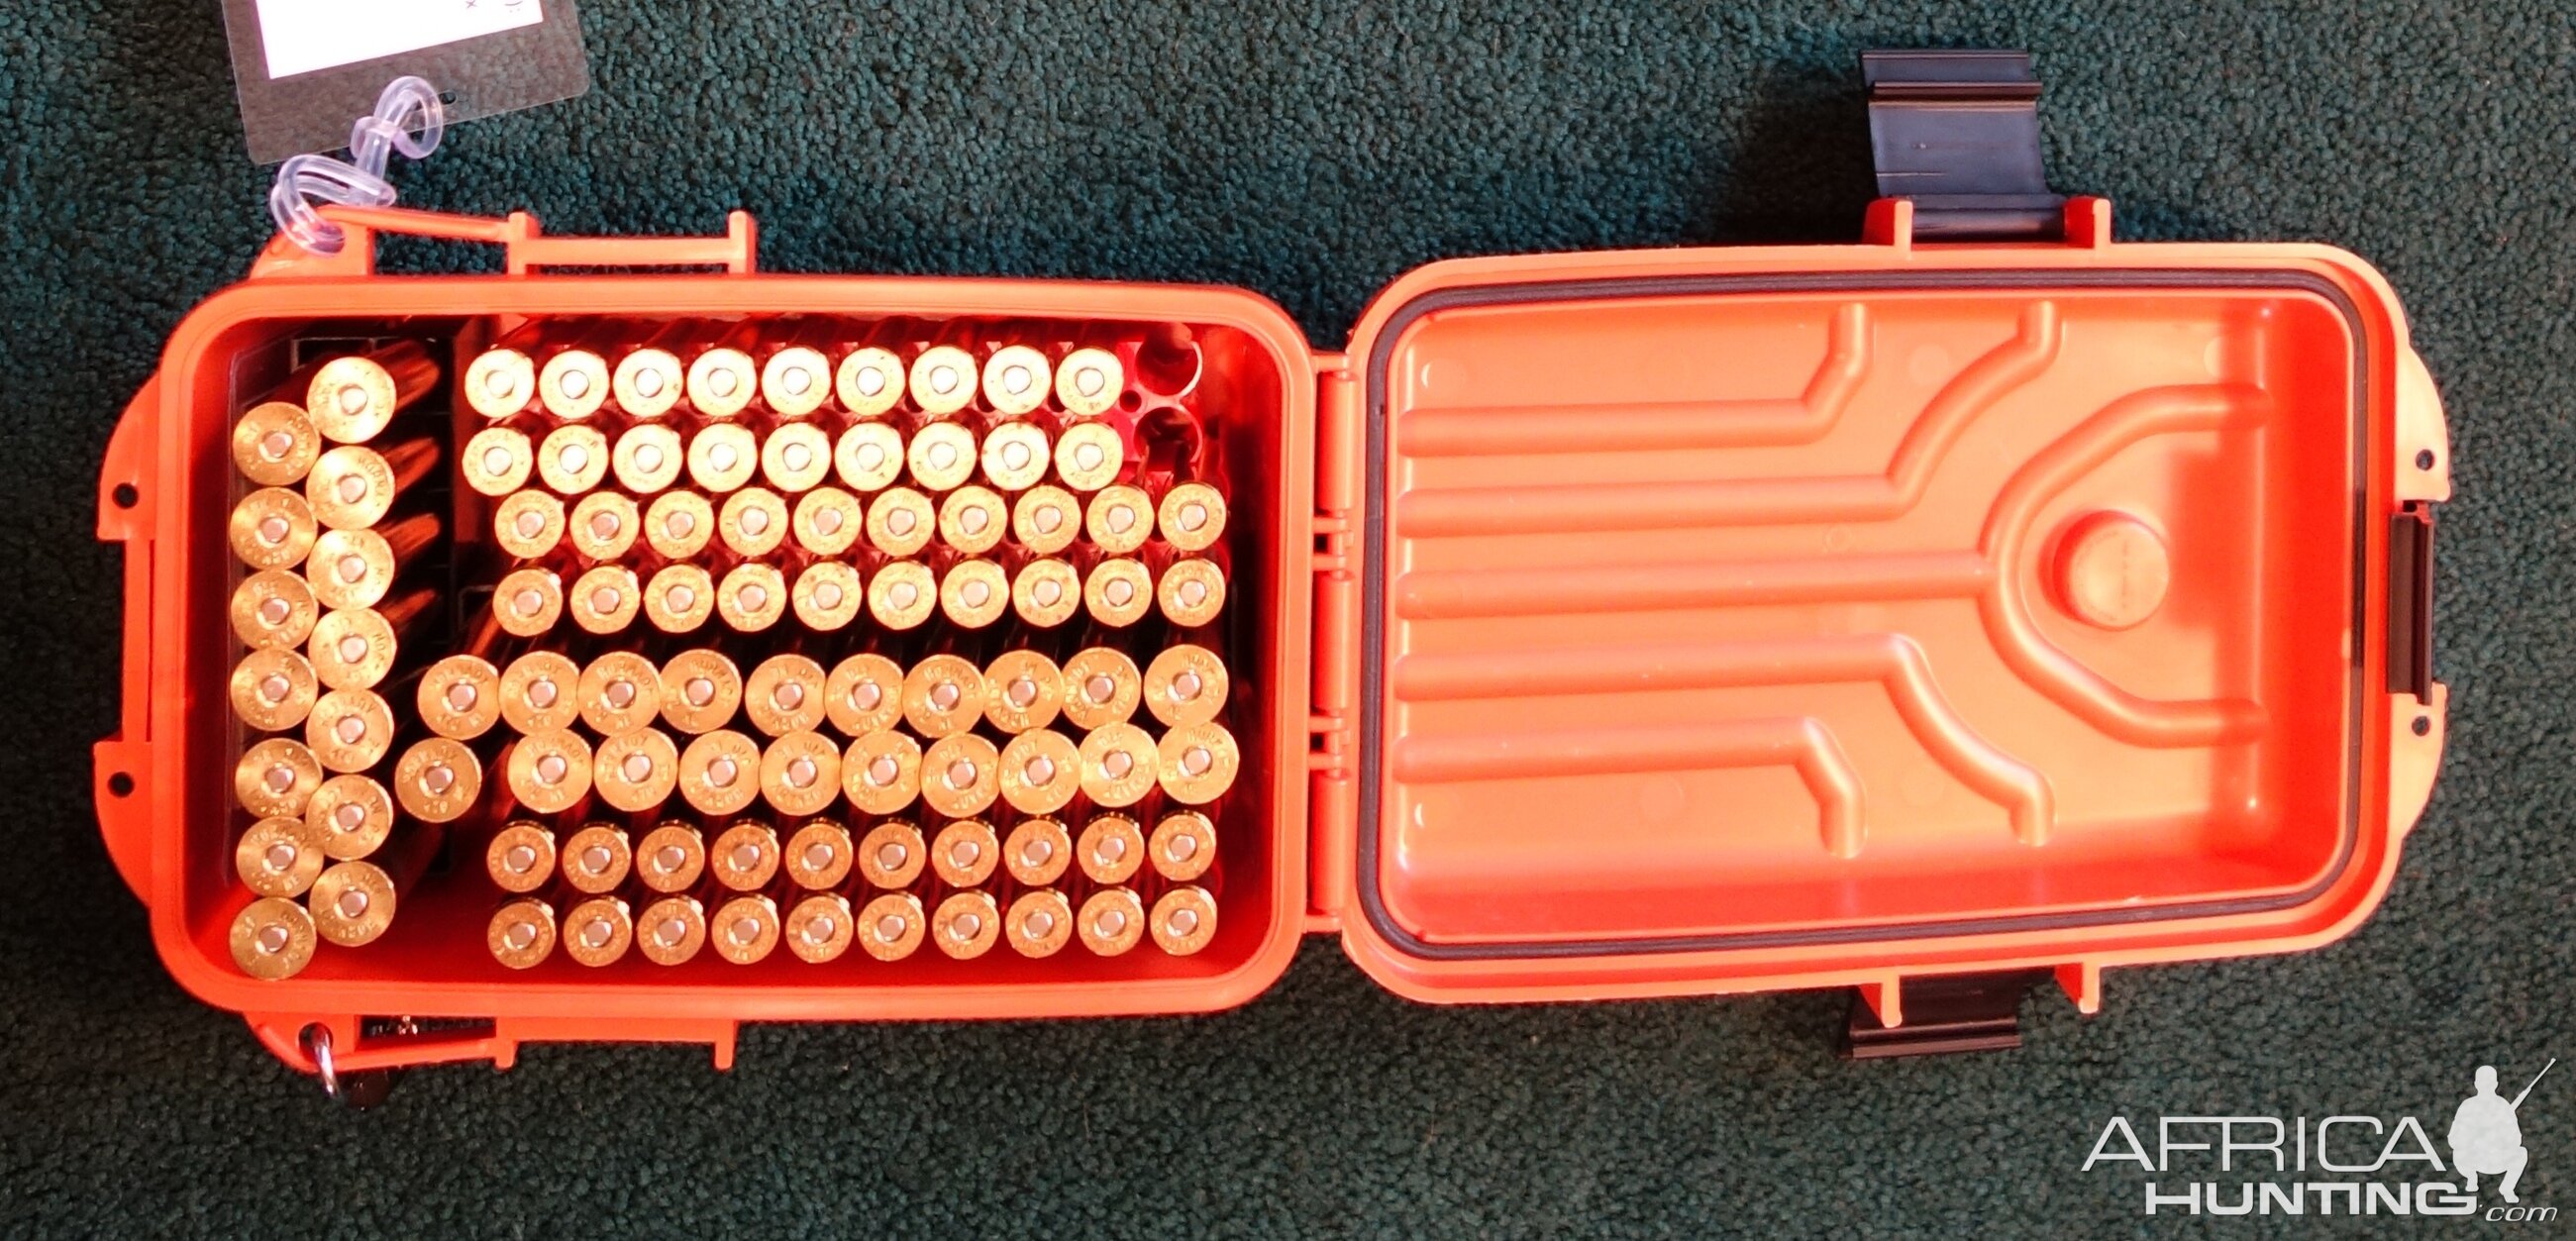 MTM Travel-Survivor dry box packed with Ammo